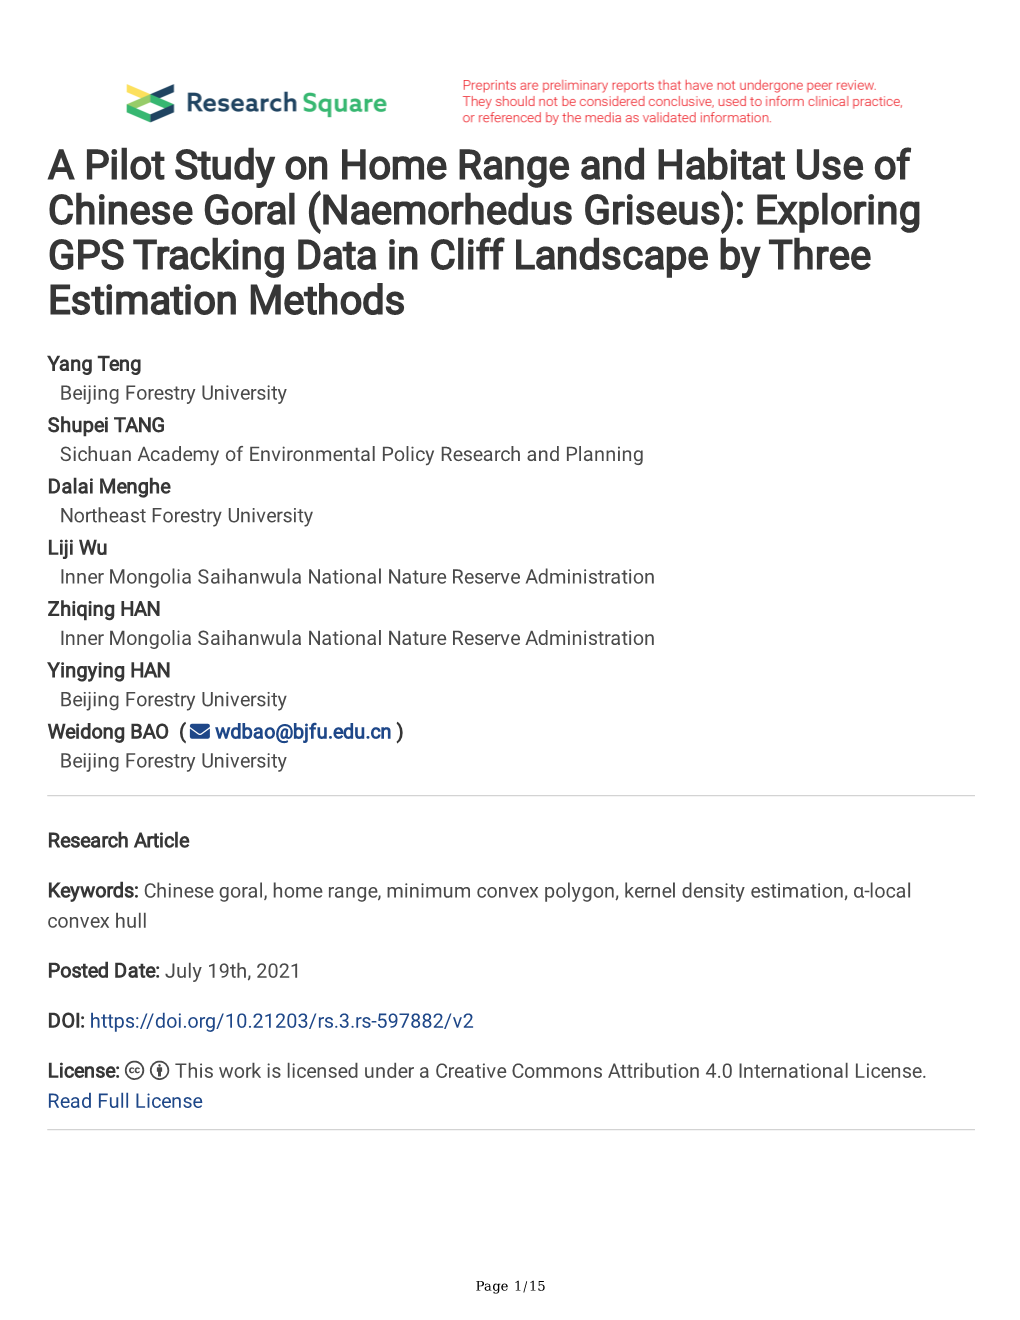 A Pilot Study on Home Range and Habitat Use of Chinese Goral (Naemorhedus Griseus): Exploring GPS Tracking Data in Cliff Landscape by Three Estimation Methods